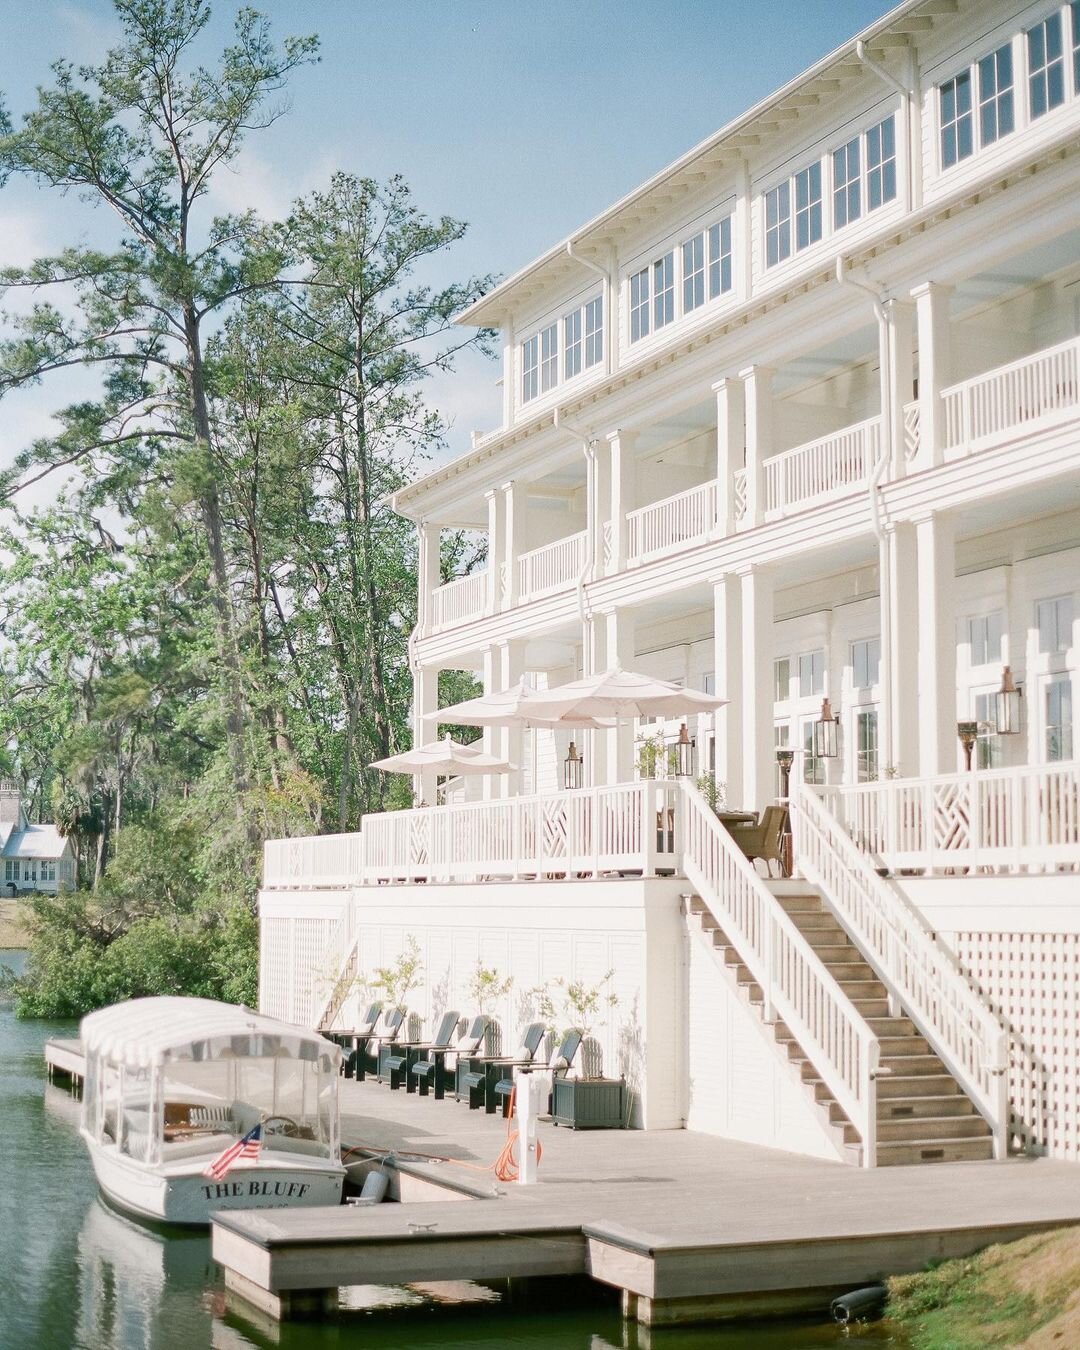 Montage Palmetto Bluff waterfront hotel in Bluffton, Photo by Julie Livingston (@julielivingstonphotography)